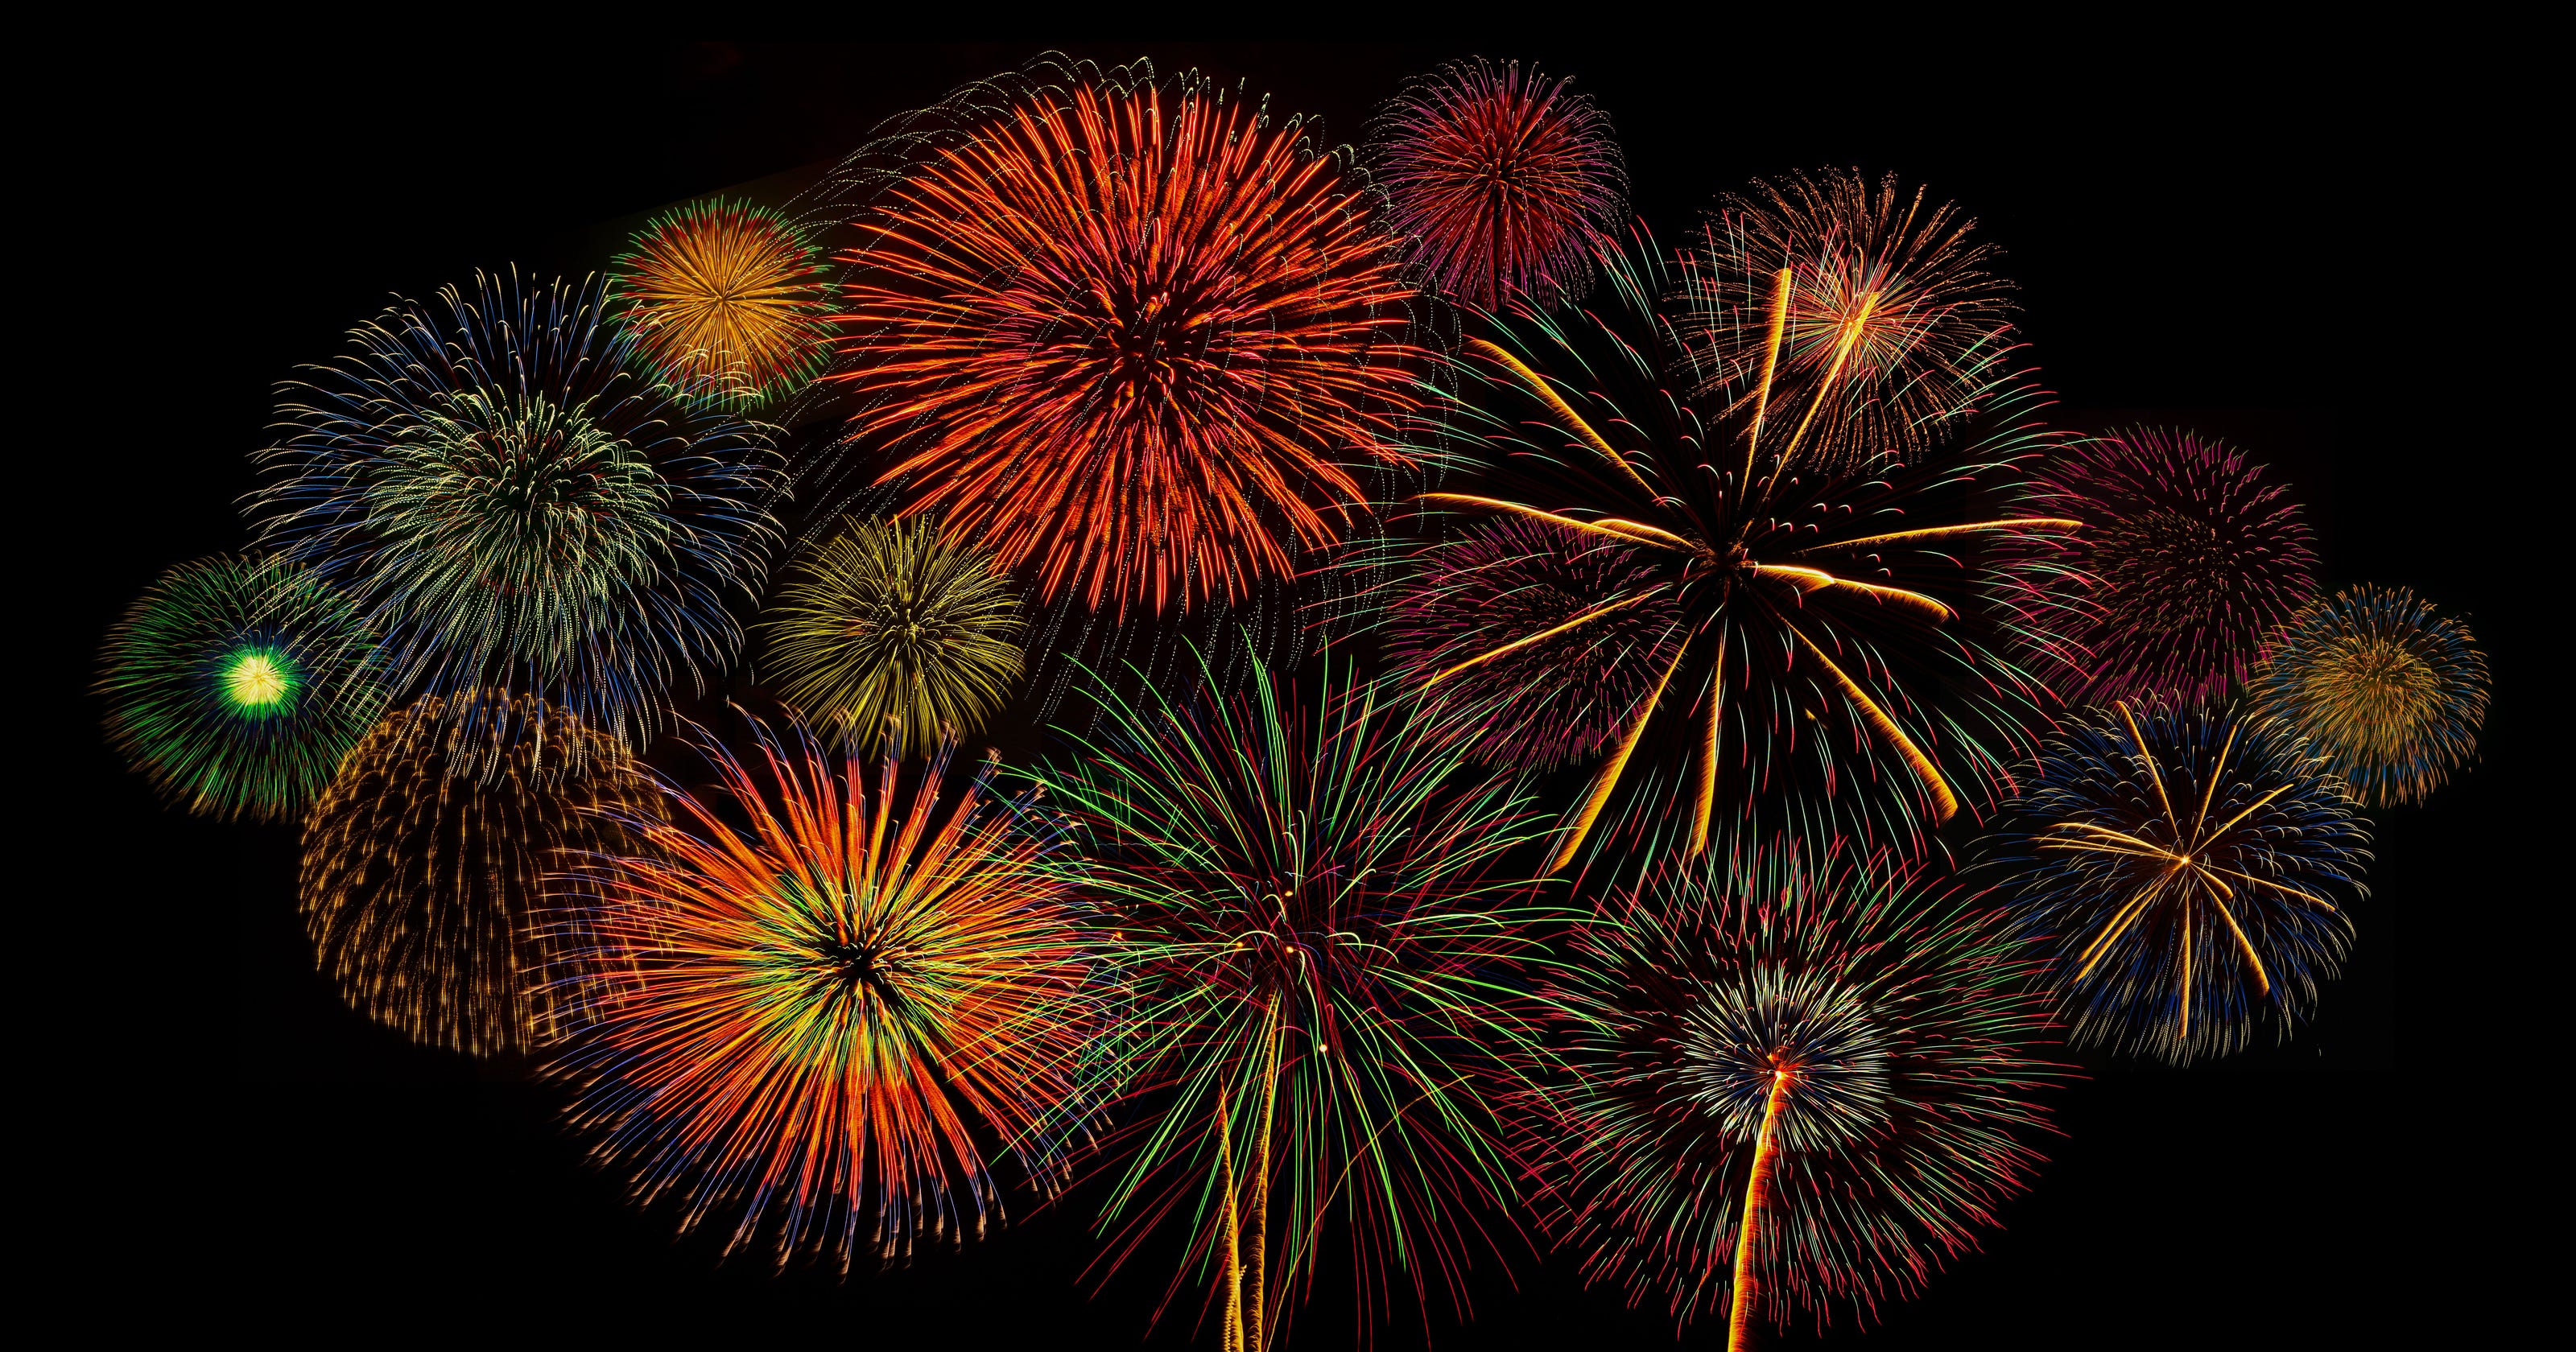 Fireworks sold in Michigan recalled for containing too much explosives